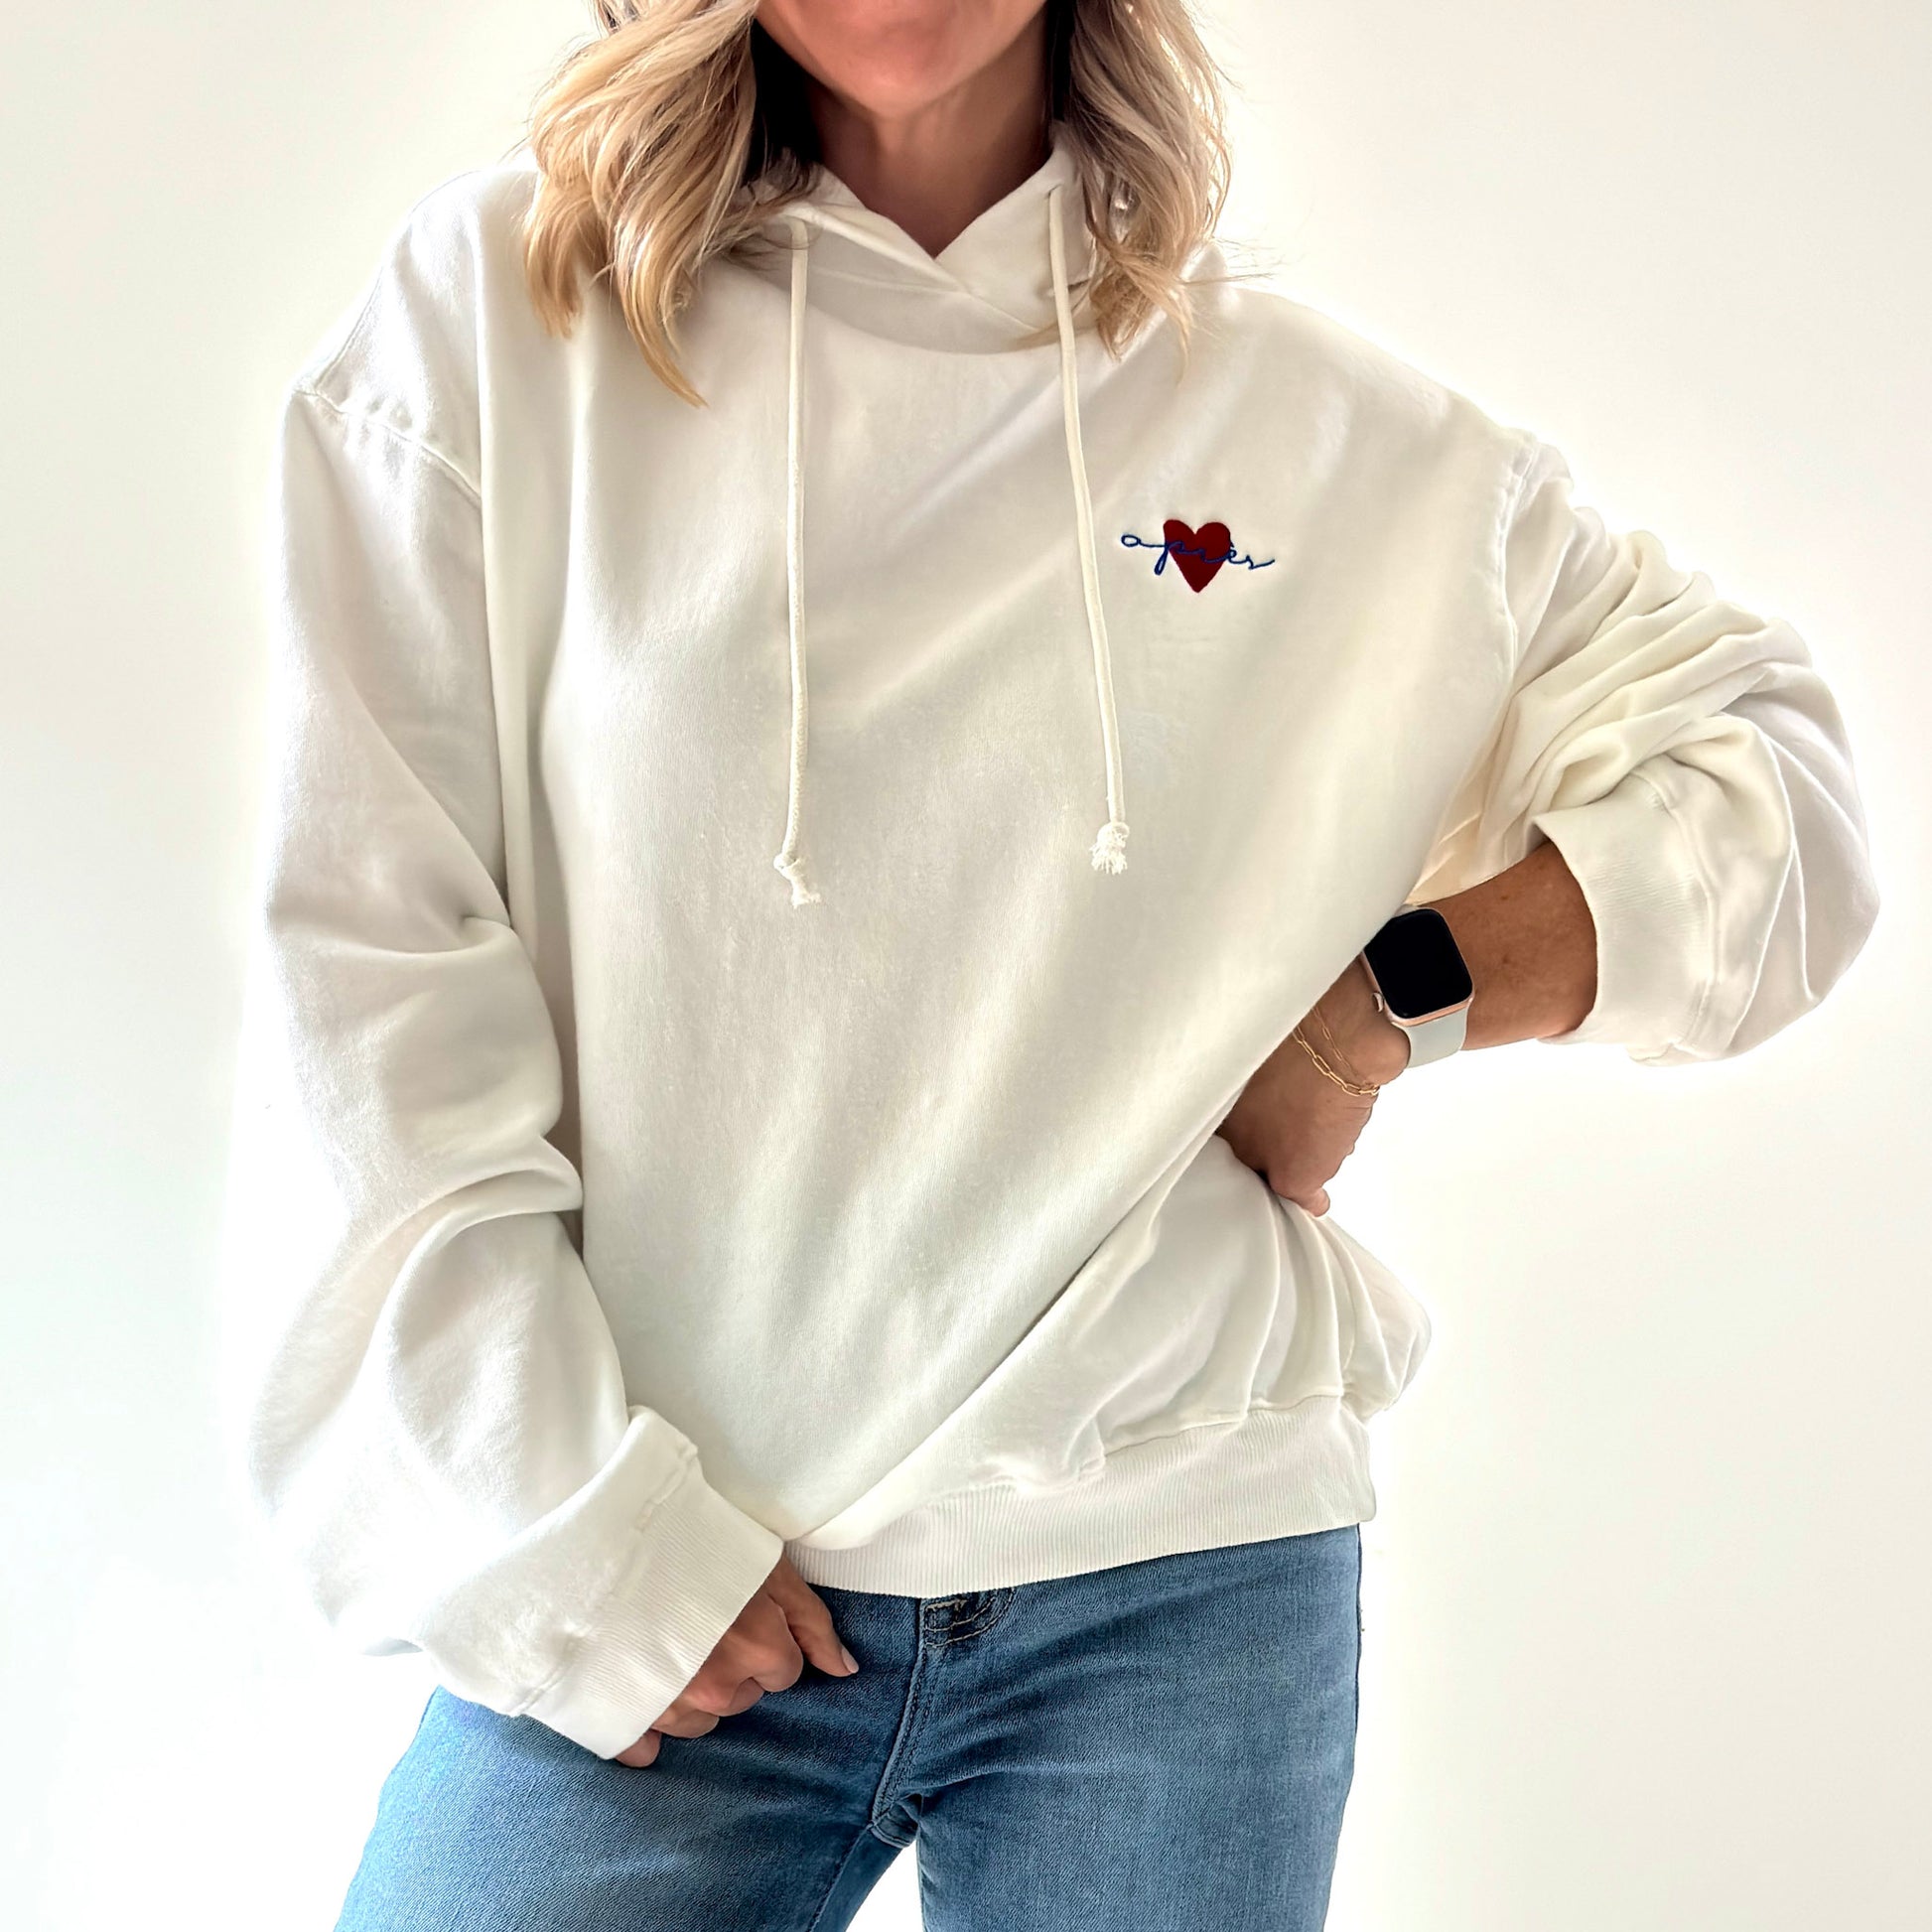 Women's ivory pullover hooded oversized light weight fleece sweatshirt with script après and heart embroidery